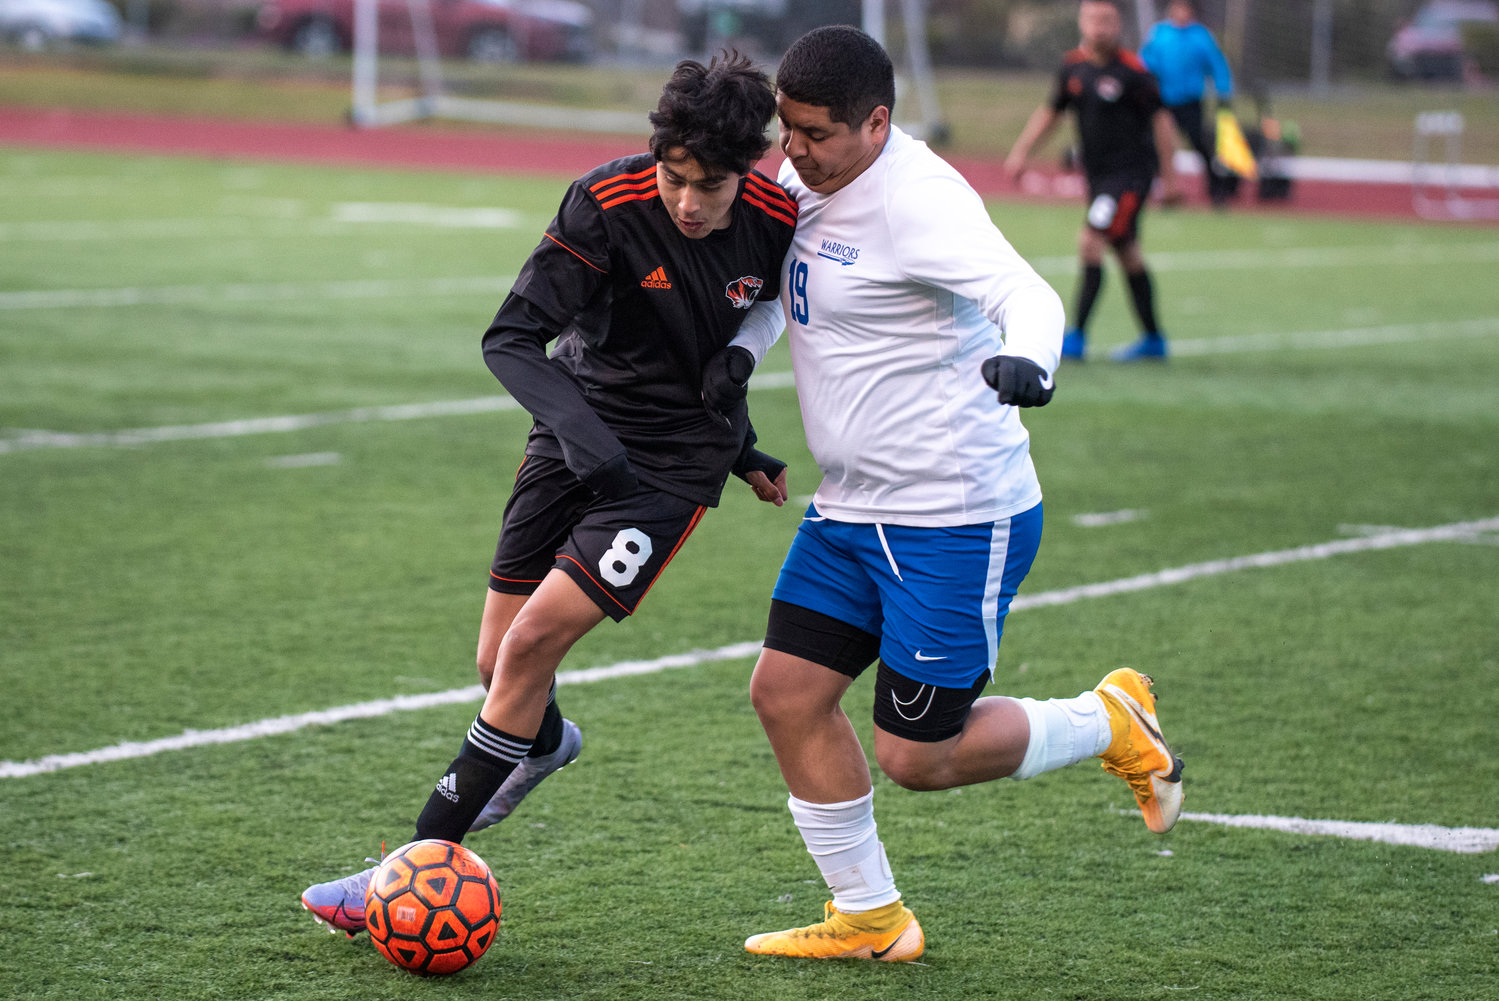 Centralia's Fernando Lopez (8) and Rochester's Ivoc Castillo (19) battle for the ball during a league game in Centralia on April 12.